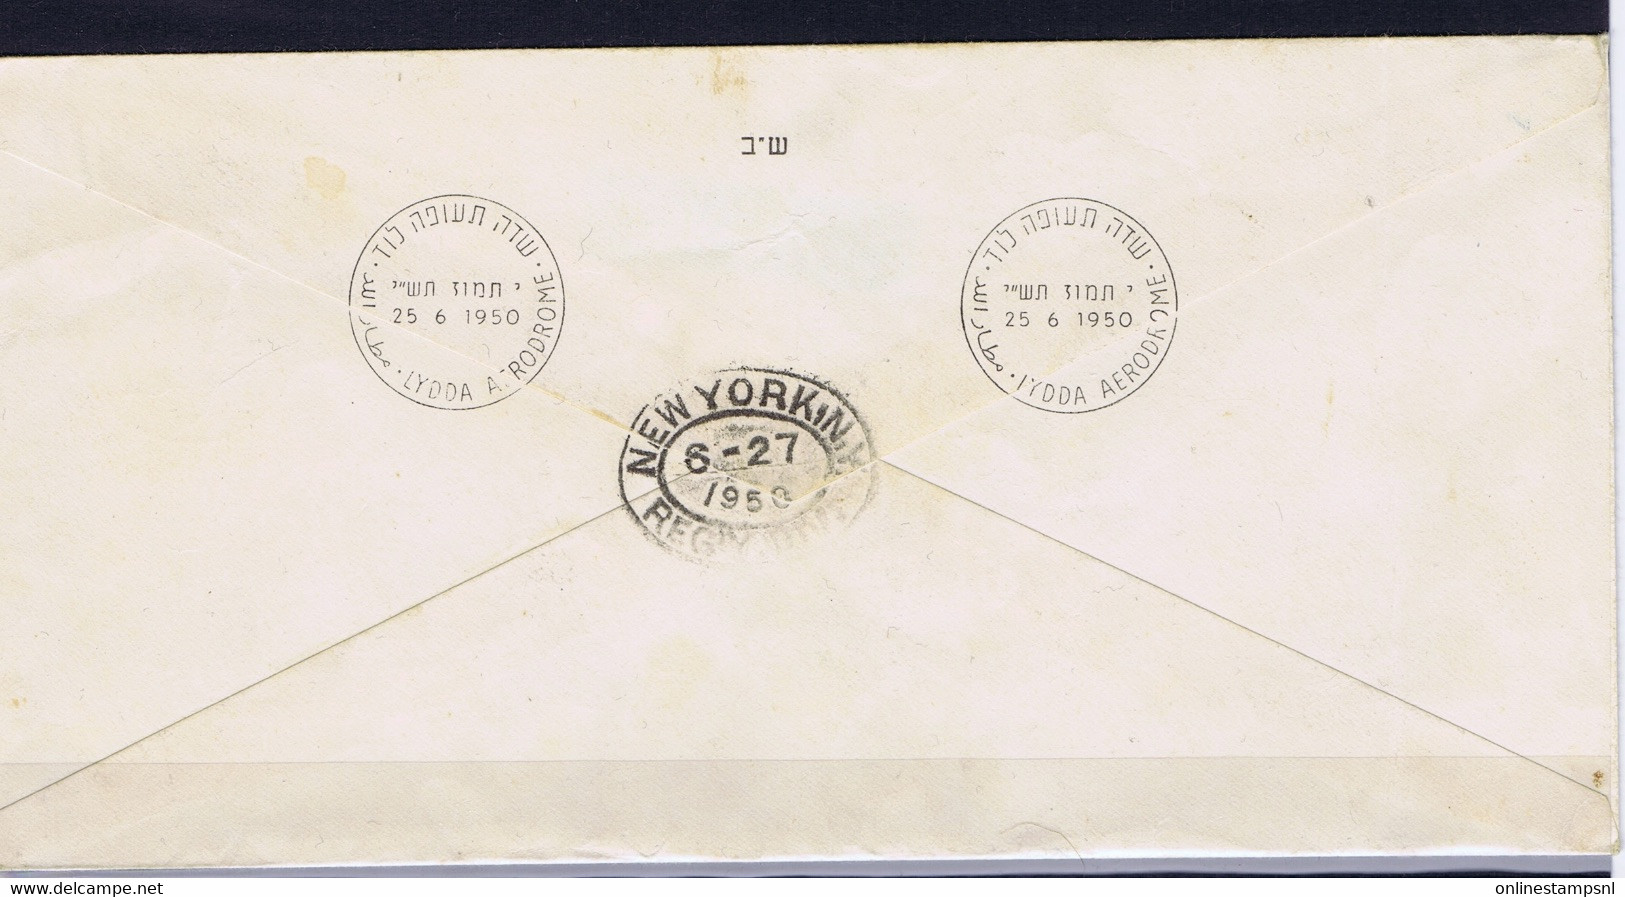 Israel: Airmail FDC Mi 33 - 38  Registered Cover ToNew York - FDC